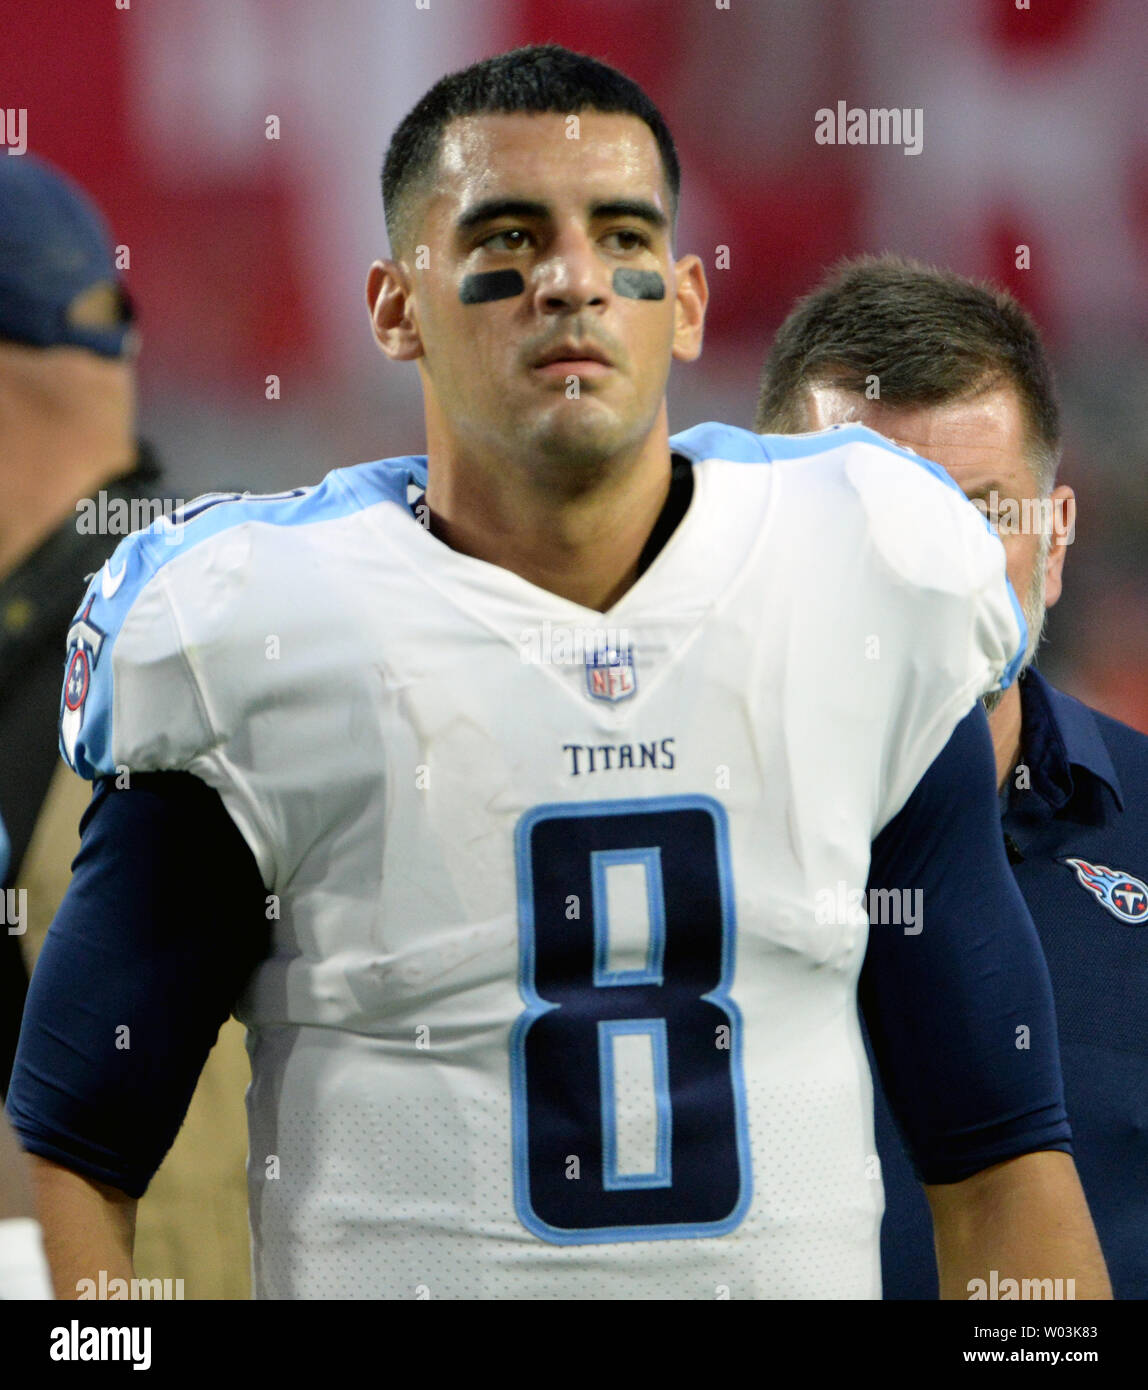 East Rutherford, New Jersey, USA. 13th Dec, 2015. Tennessee Titans  quarterback Marcus Mariota (8) in action prior to the NFL game between the  Tennessee Titans and the New York Jets at MetLife